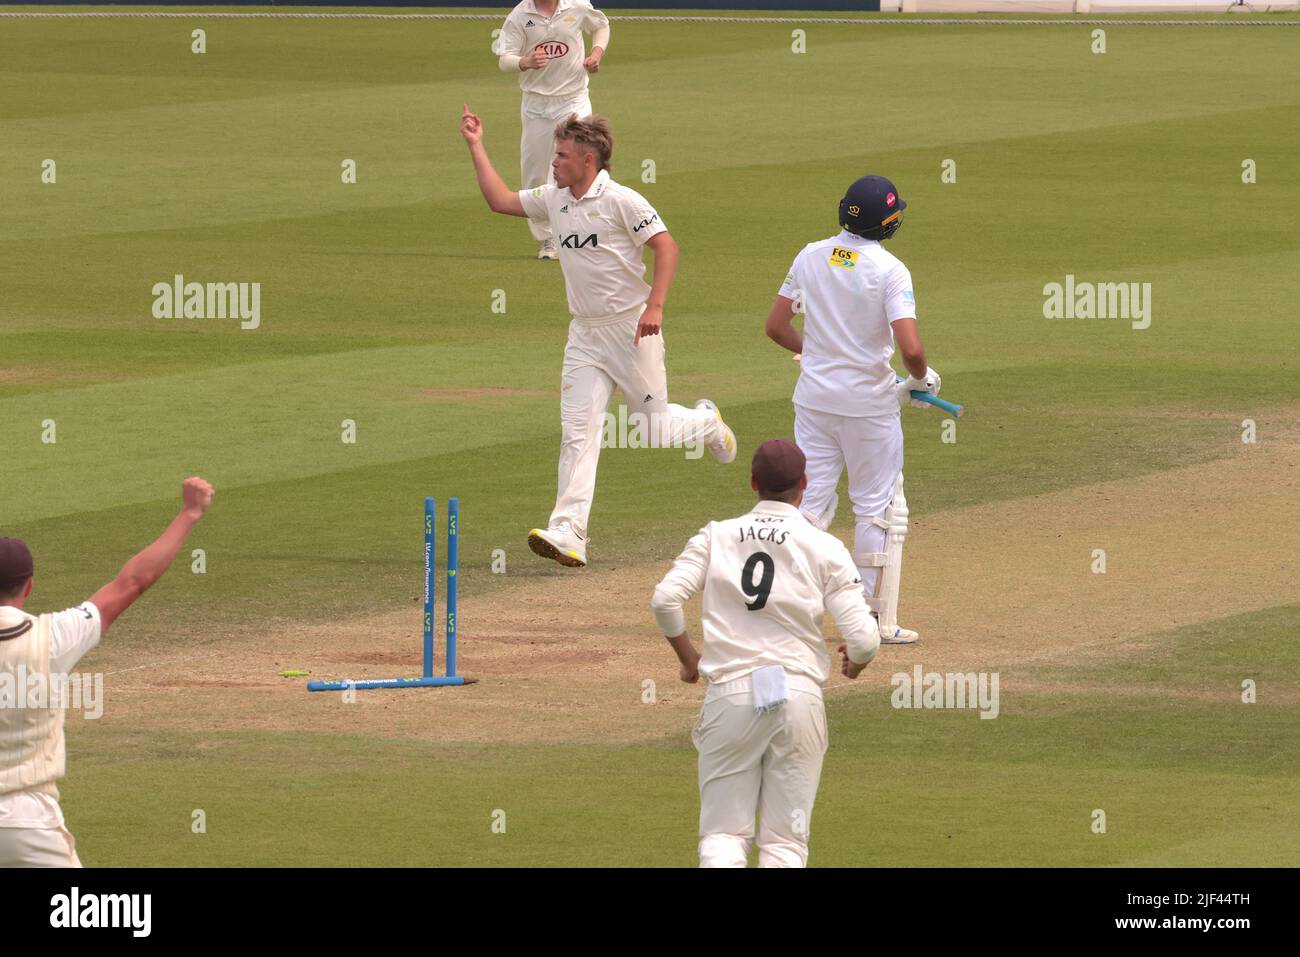 29 June, 2022. London, UK. Surrey’s Sam Curran bowls Jack Leaning as Surrey take on Kent in the County Championship at the Kia Oval, day four. David Rowe/Alamy Live News Stock Photo